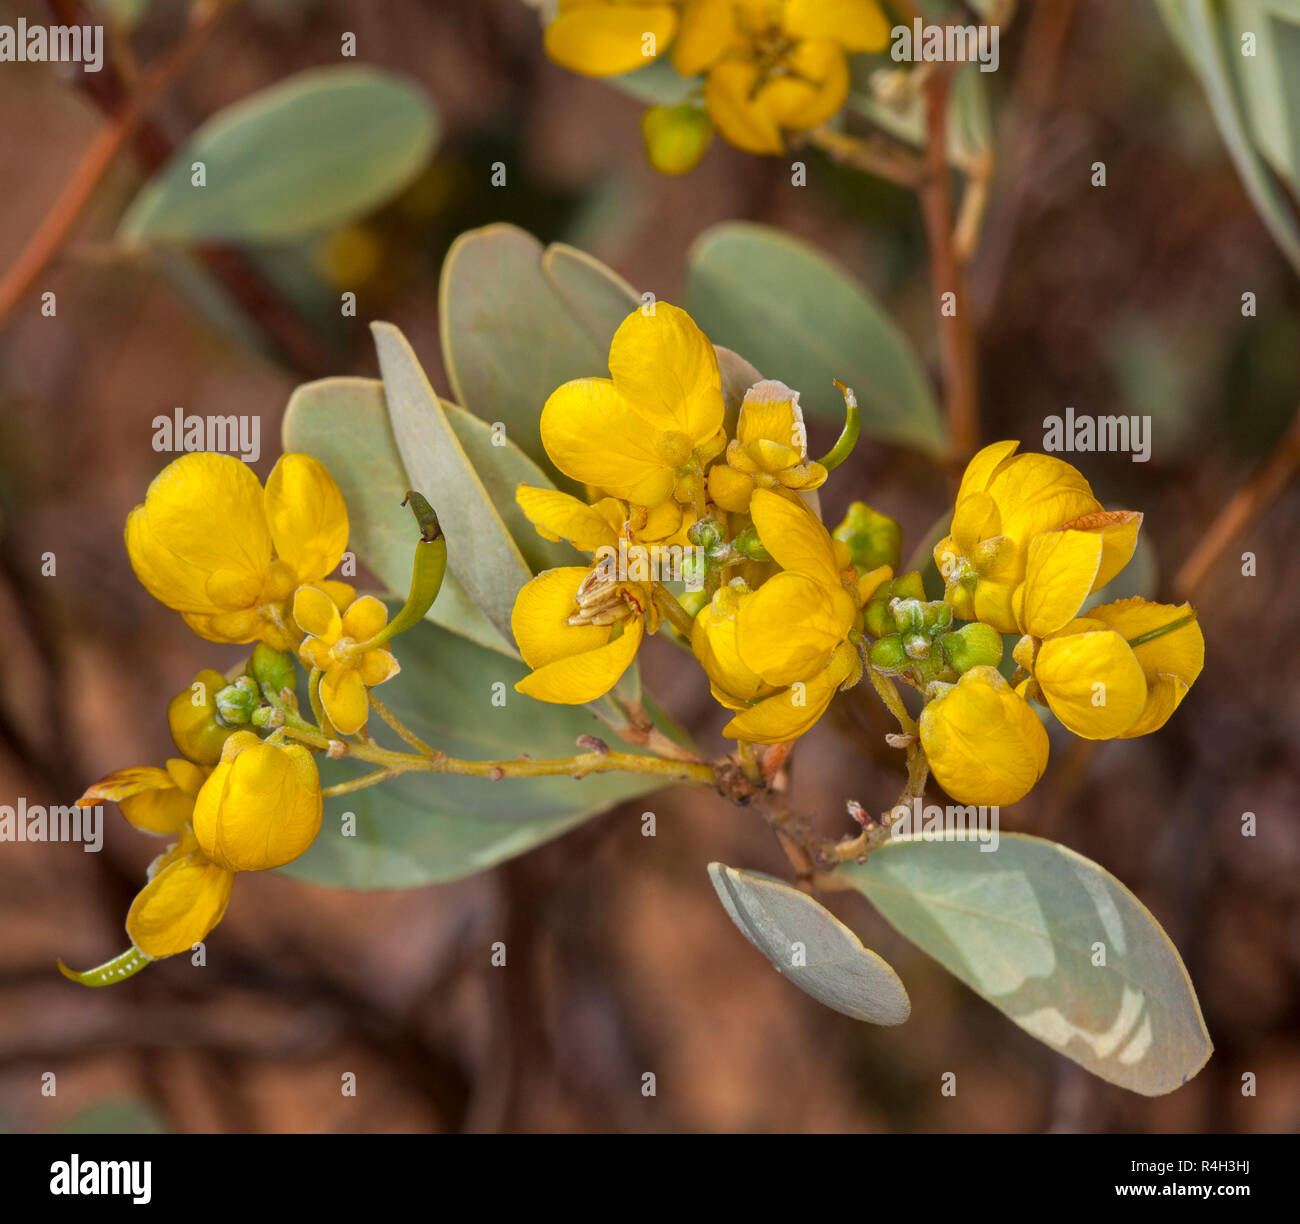 Wildflowers, cluster of vivid yellow flowers and grey / green leaves of Senna / cassia artemisioides, Australian native plant in outback Queensland Stock Photo